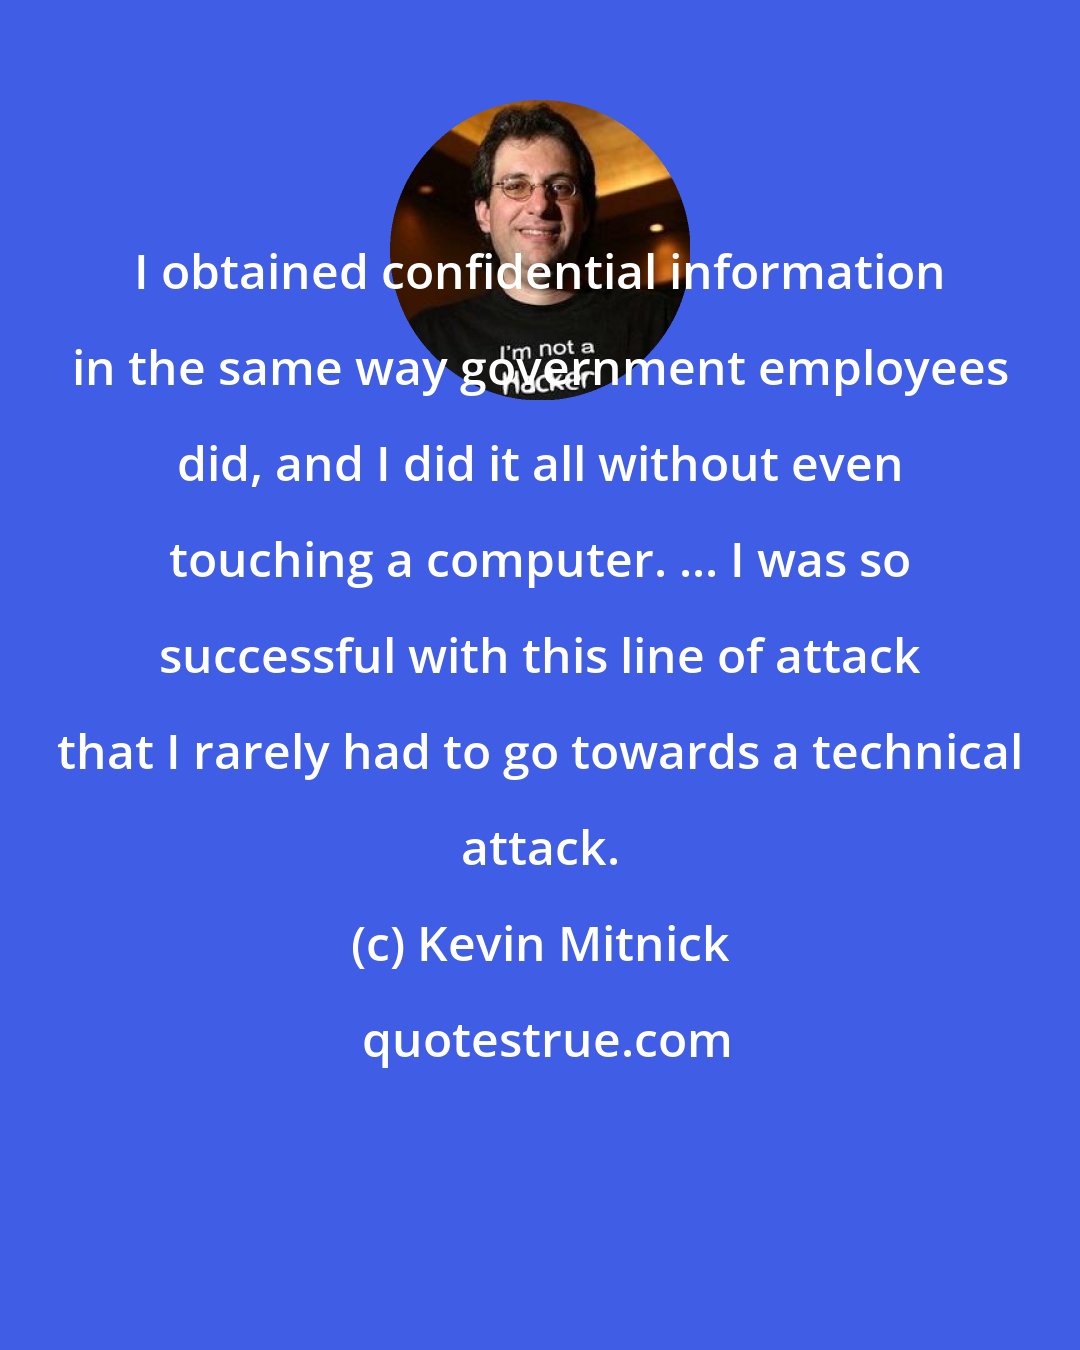 Kevin Mitnick: I obtained confidential information in the same way government employees did, and I did it all without even touching a computer. ... I was so successful with this line of attack that I rarely had to go towards a technical attack.